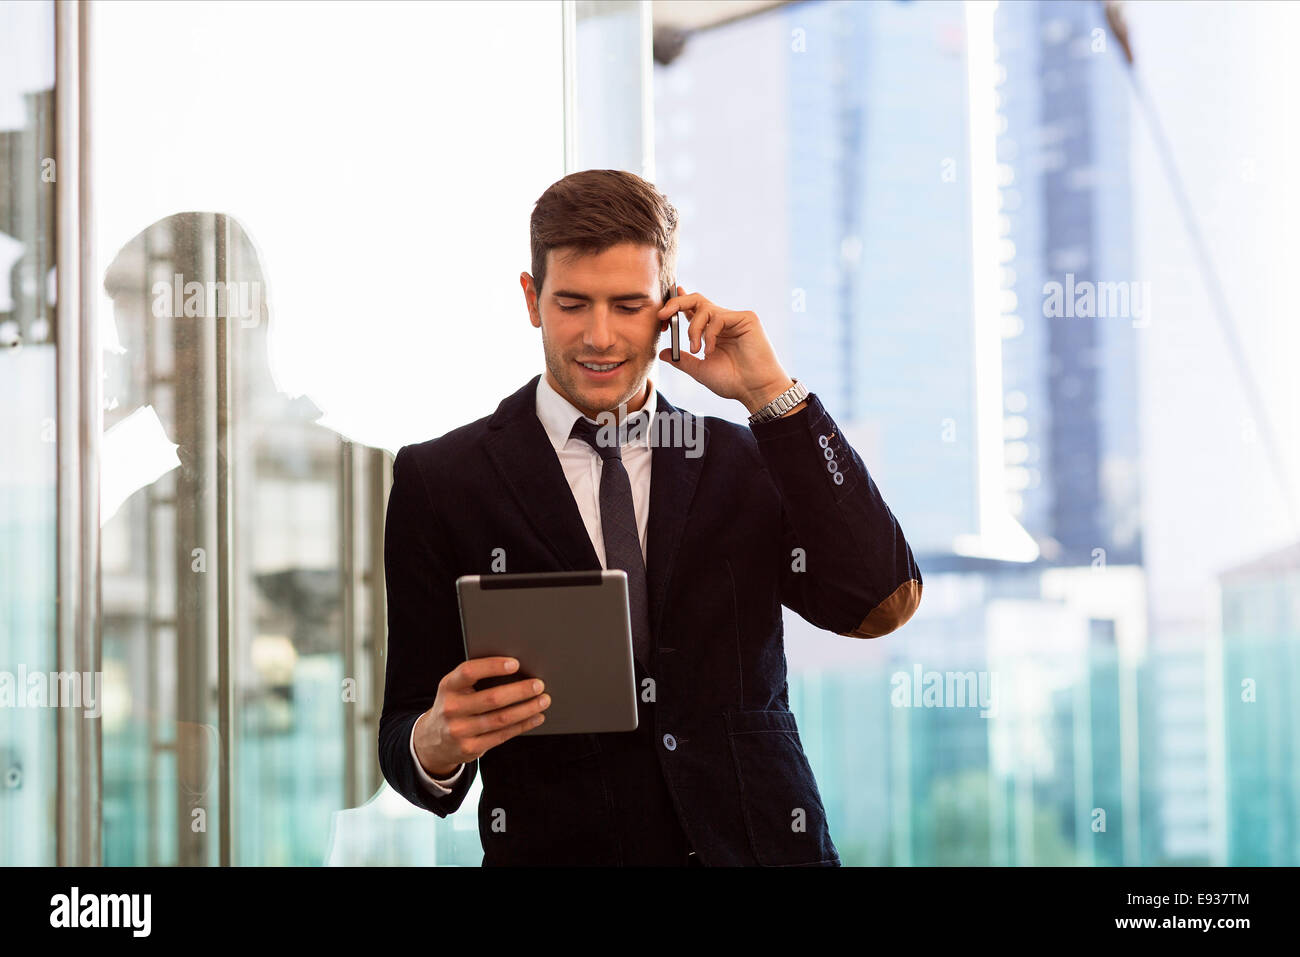 Businessman using Mobile phone and Digital Tablet Stock Photo